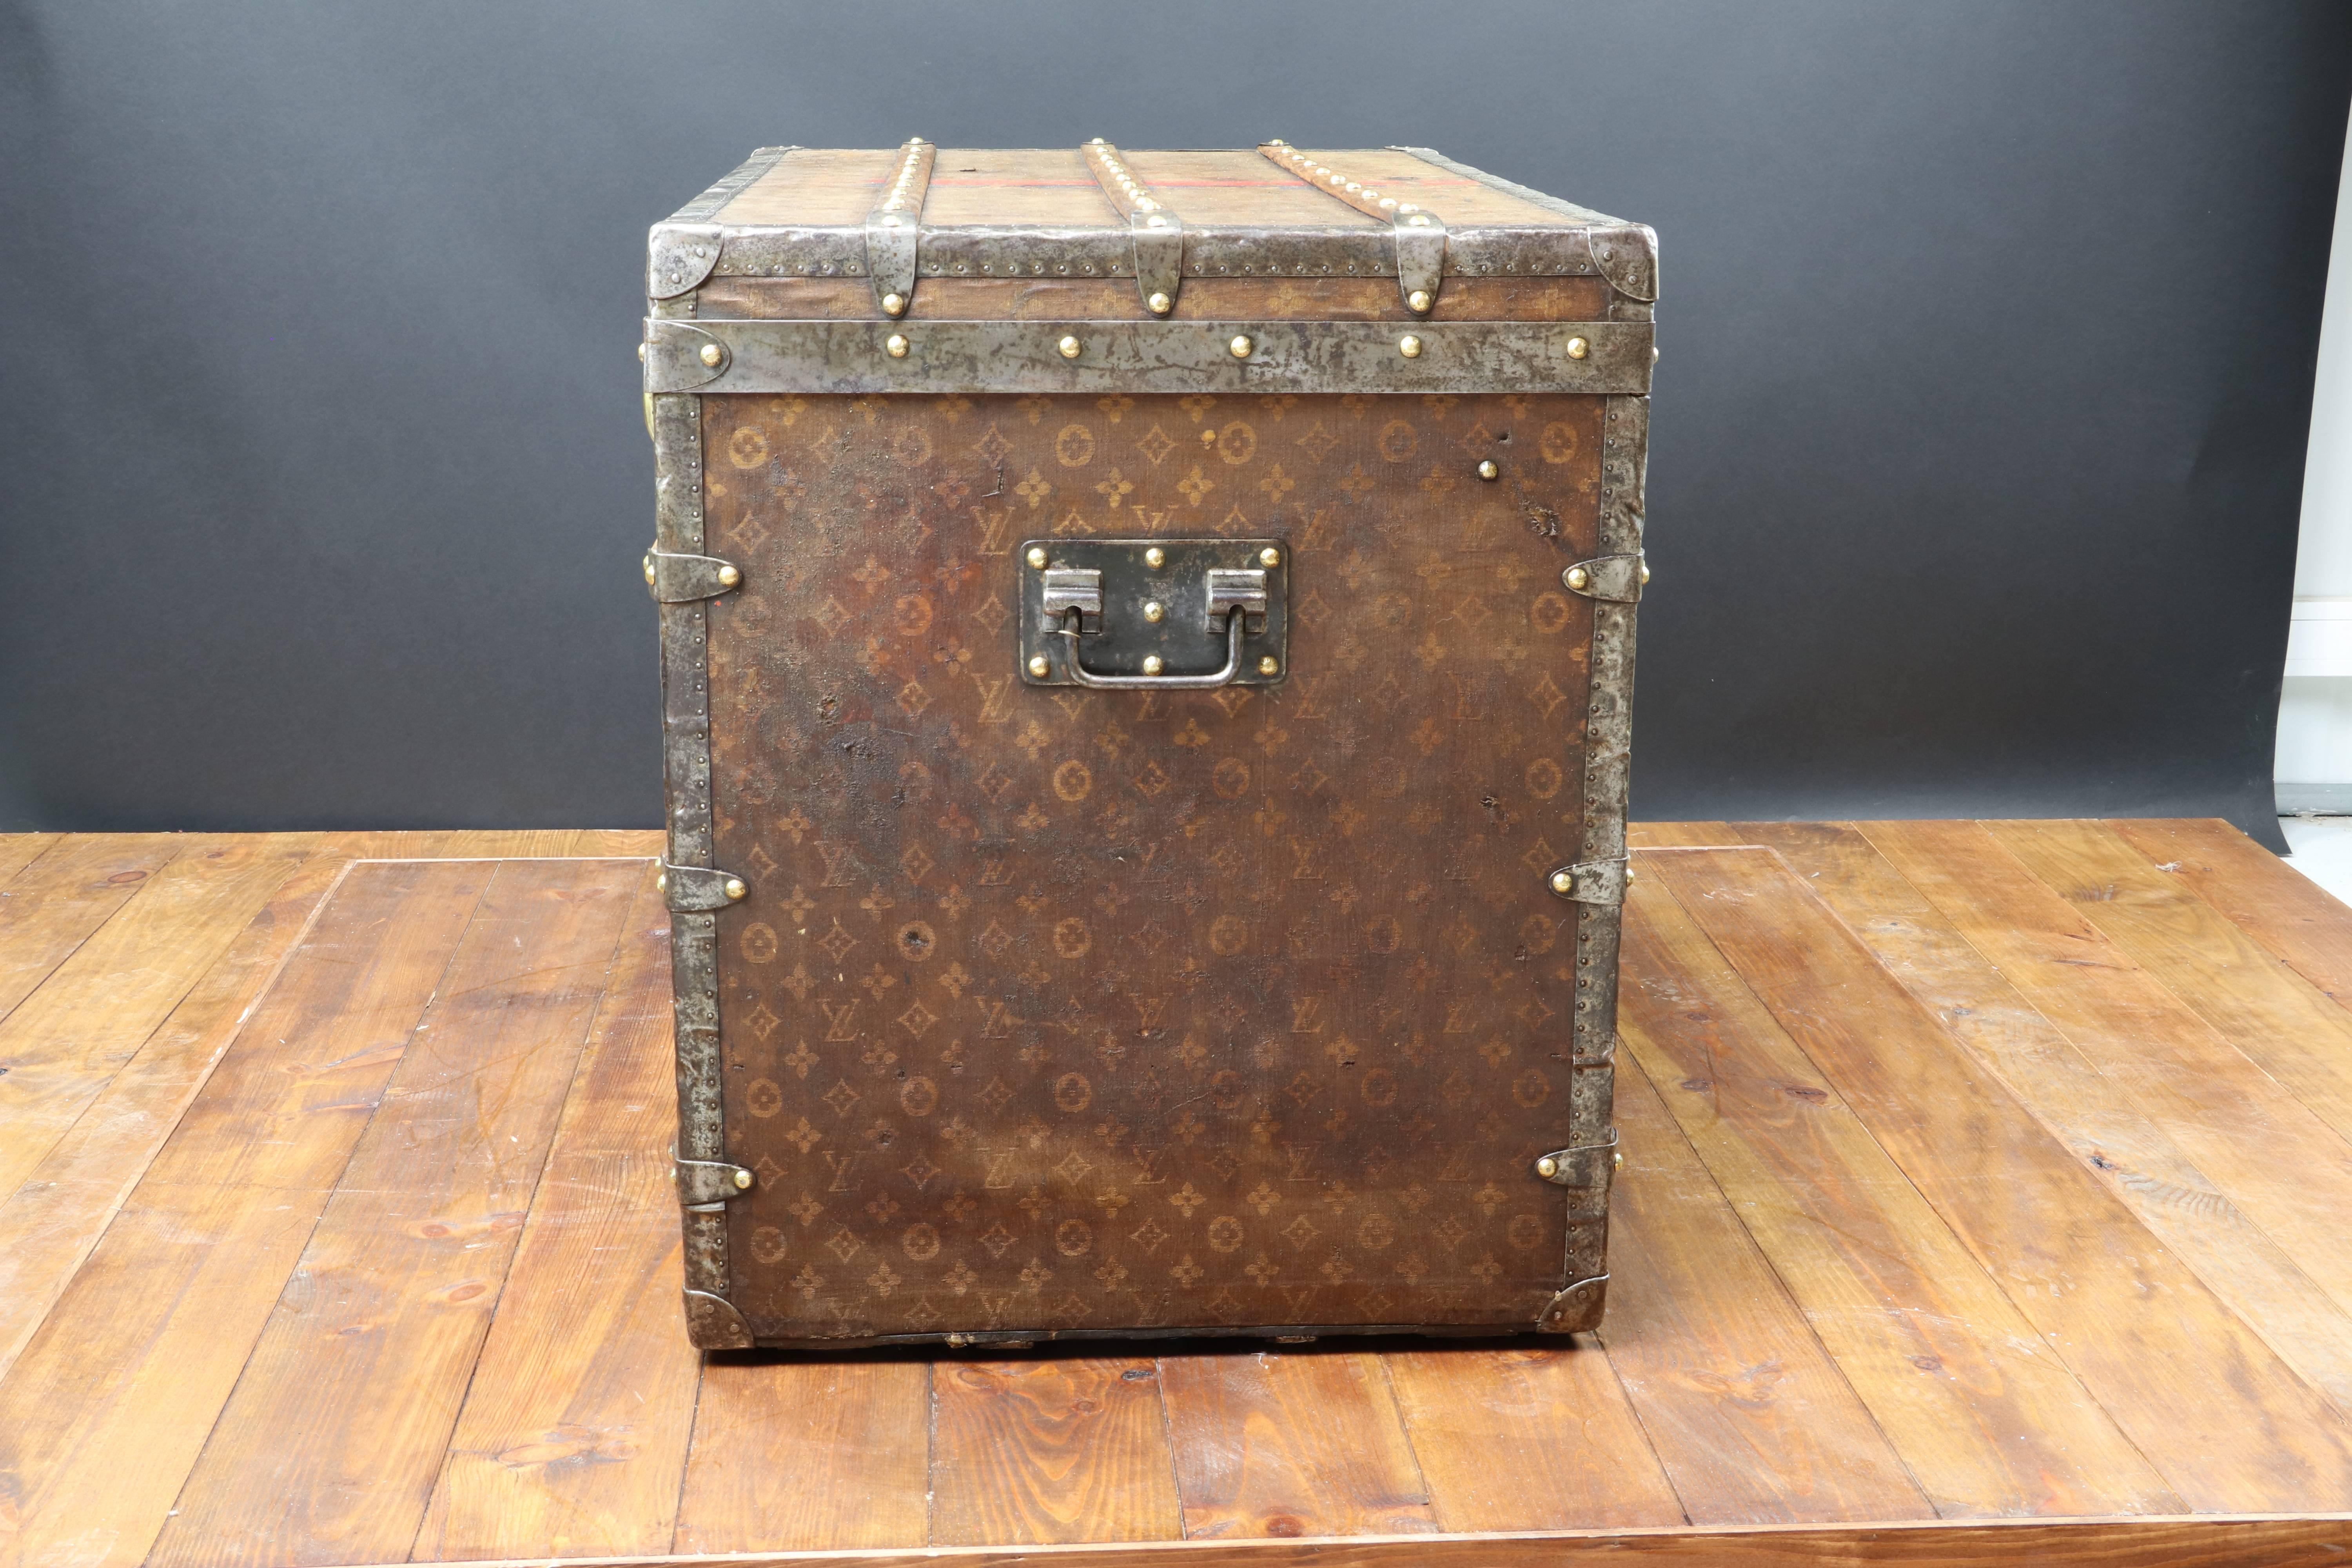 Very nice Louis Vuitton woven canvas steamer trunk featuring steel trims, locks and side handles. Its central lock is brass as well as all its stamped studs. Beautiful warm patina. Original interior with white and red stripes.
Louis Vuitton woman